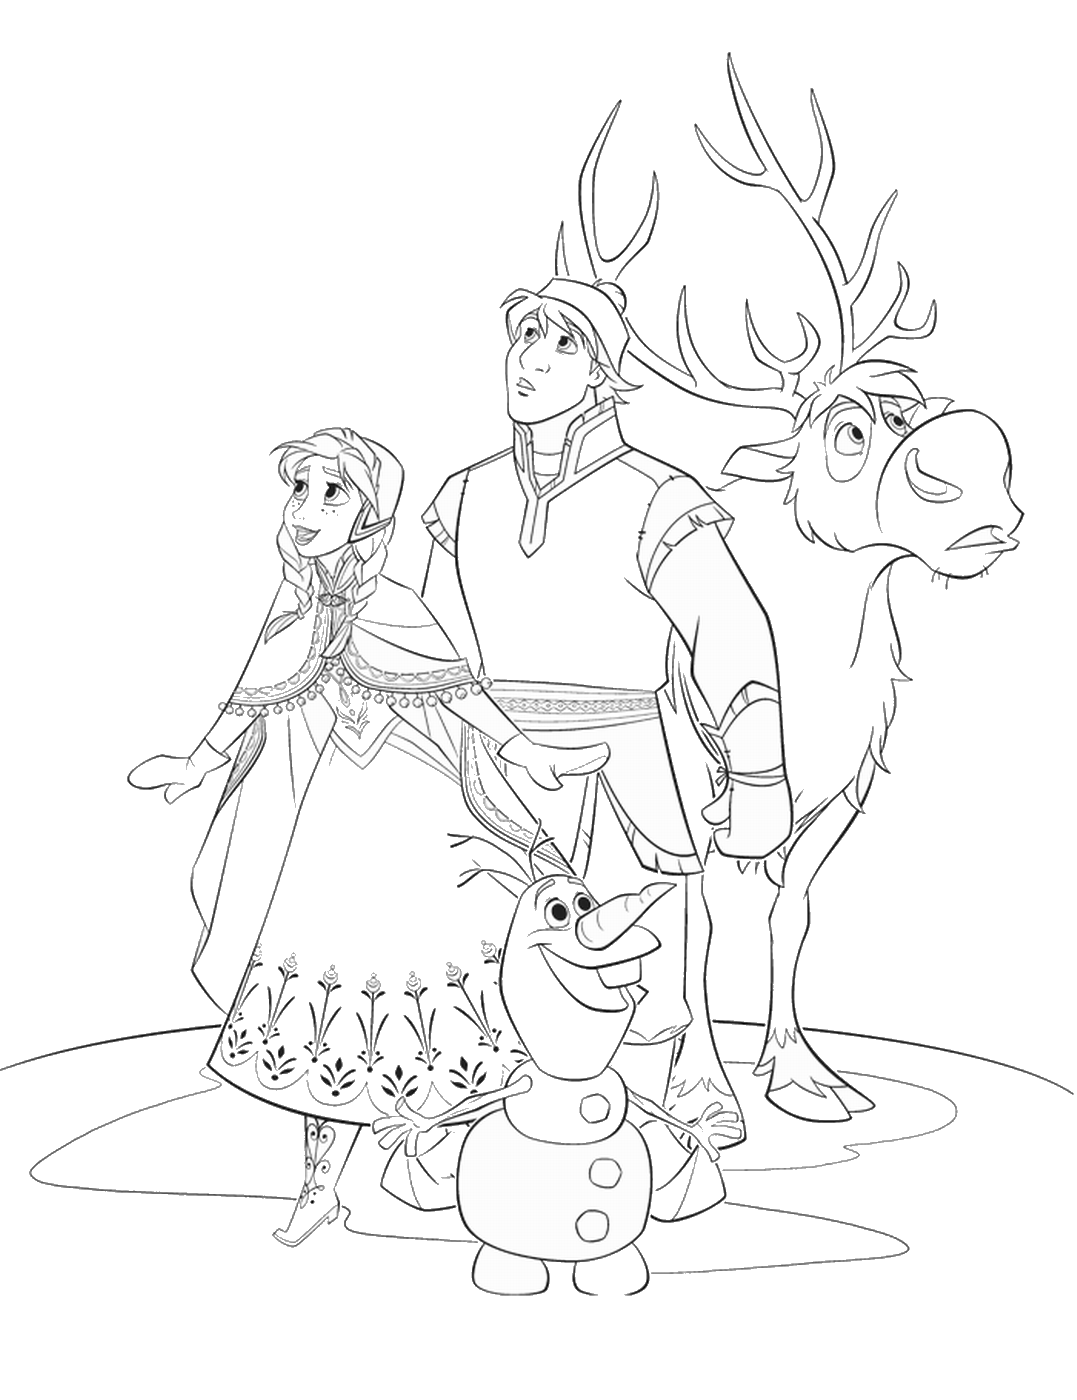 Frozen Coloring Pages TV Film frozen_coloring_19 Printable 2020 03136 Coloring4free